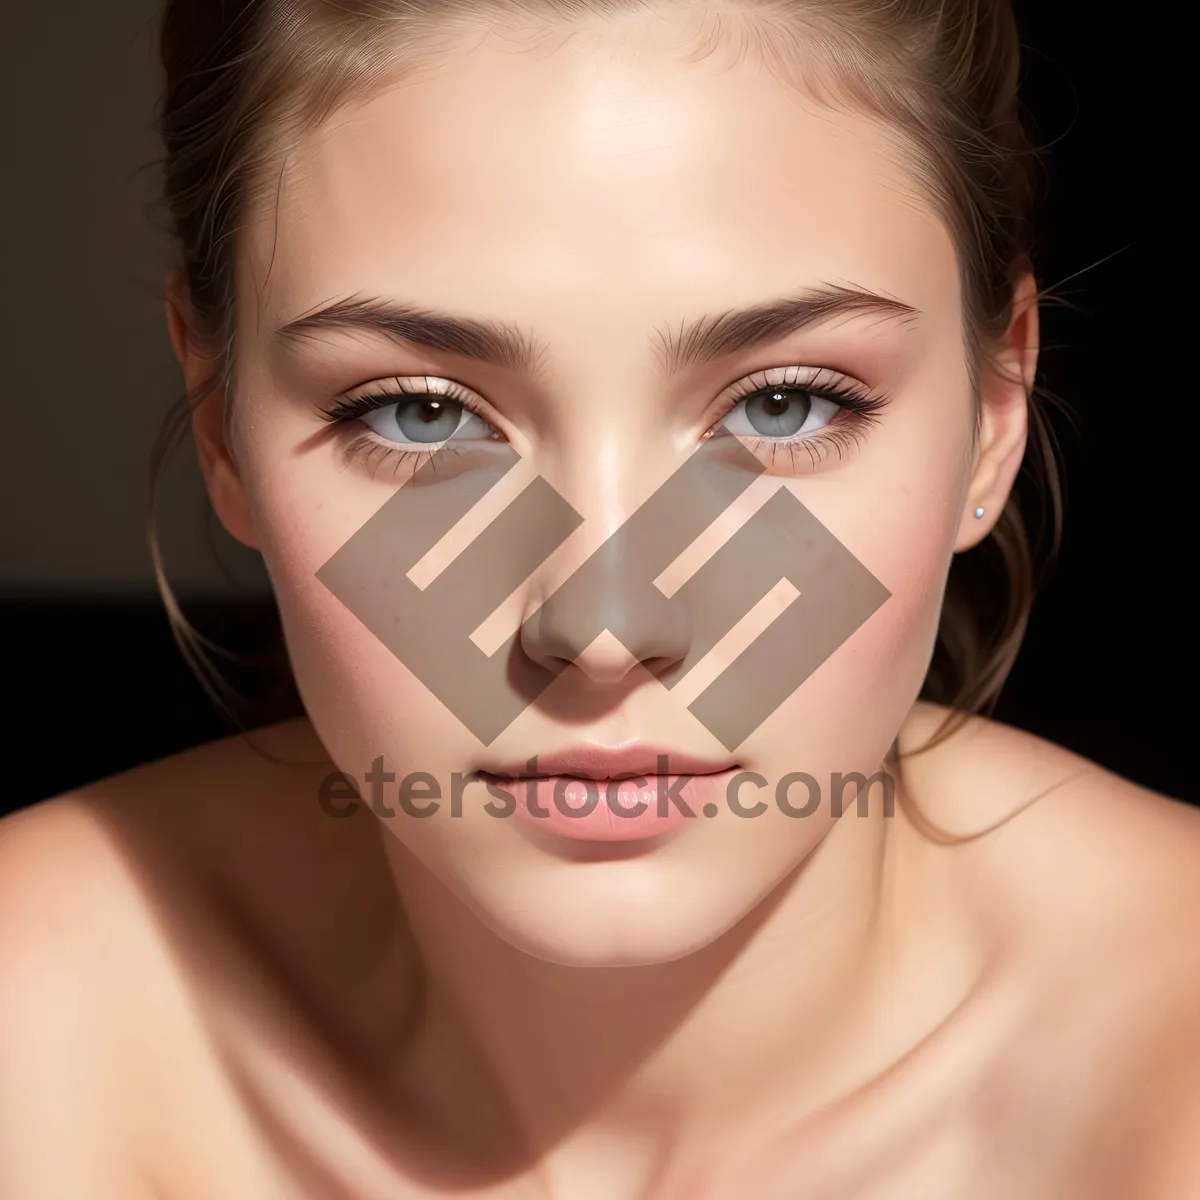 Picture of Radiant Beauty: Stunning Portrait of Attractive Sensual Lady